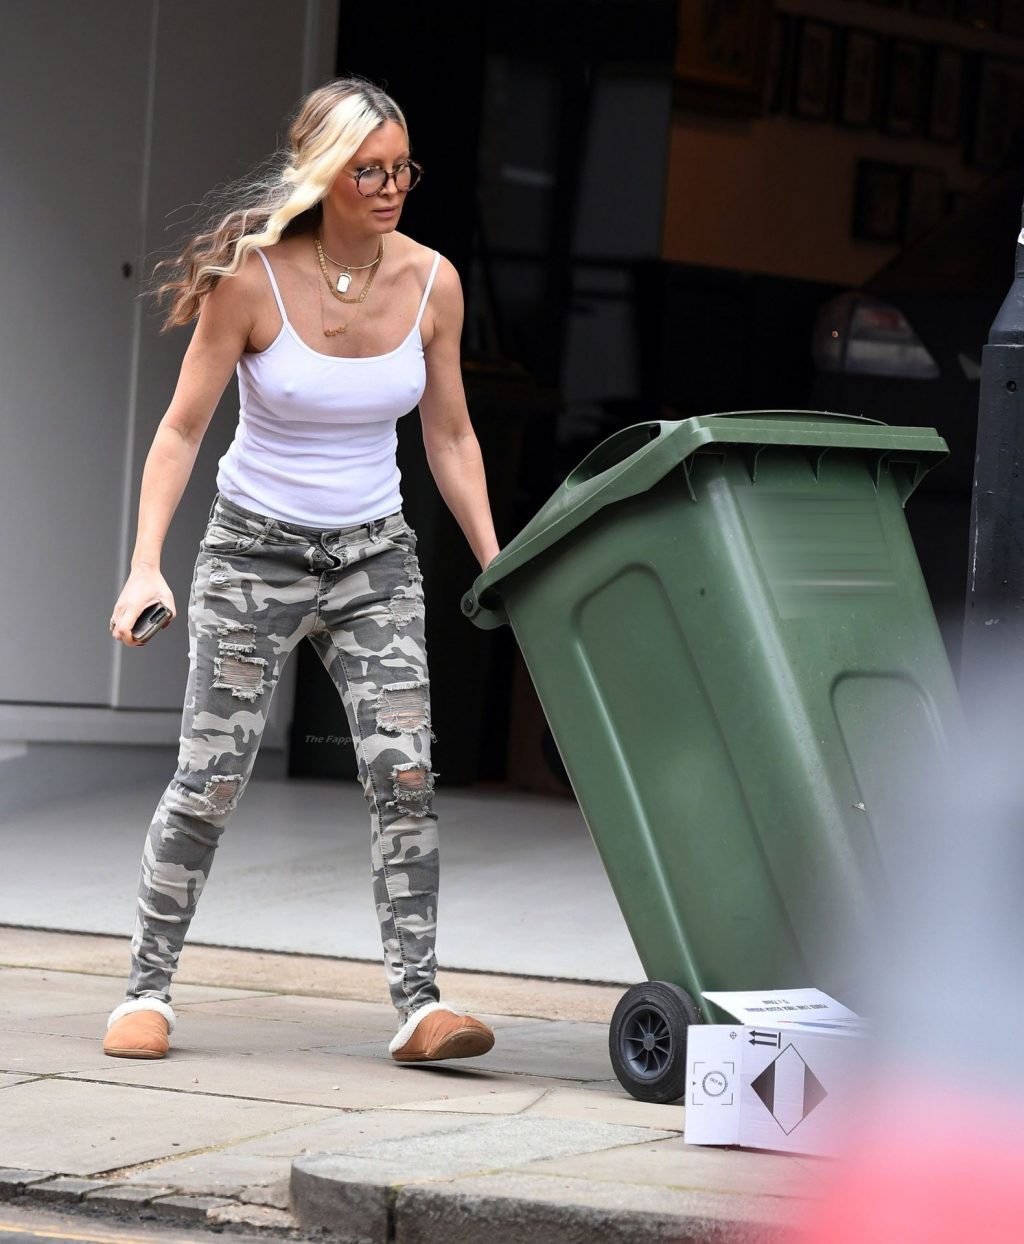 Caprice Bourret Goes Braless Under White Tank While Taking at the Trash (11 Photos)